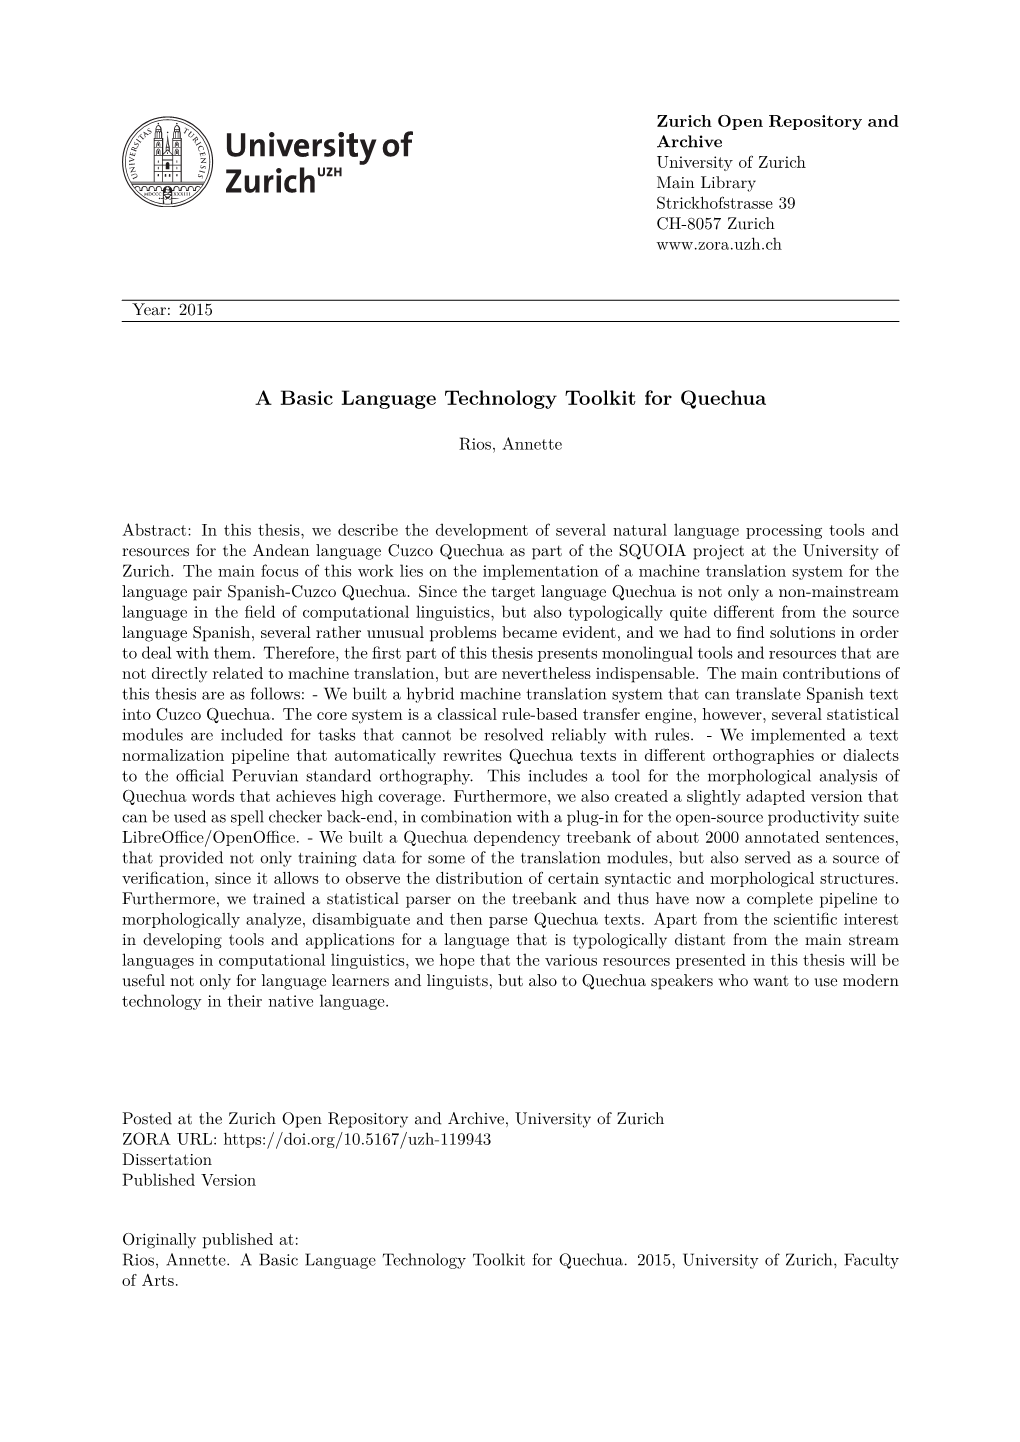 A Basic Language Technology Toolkit for Quechua